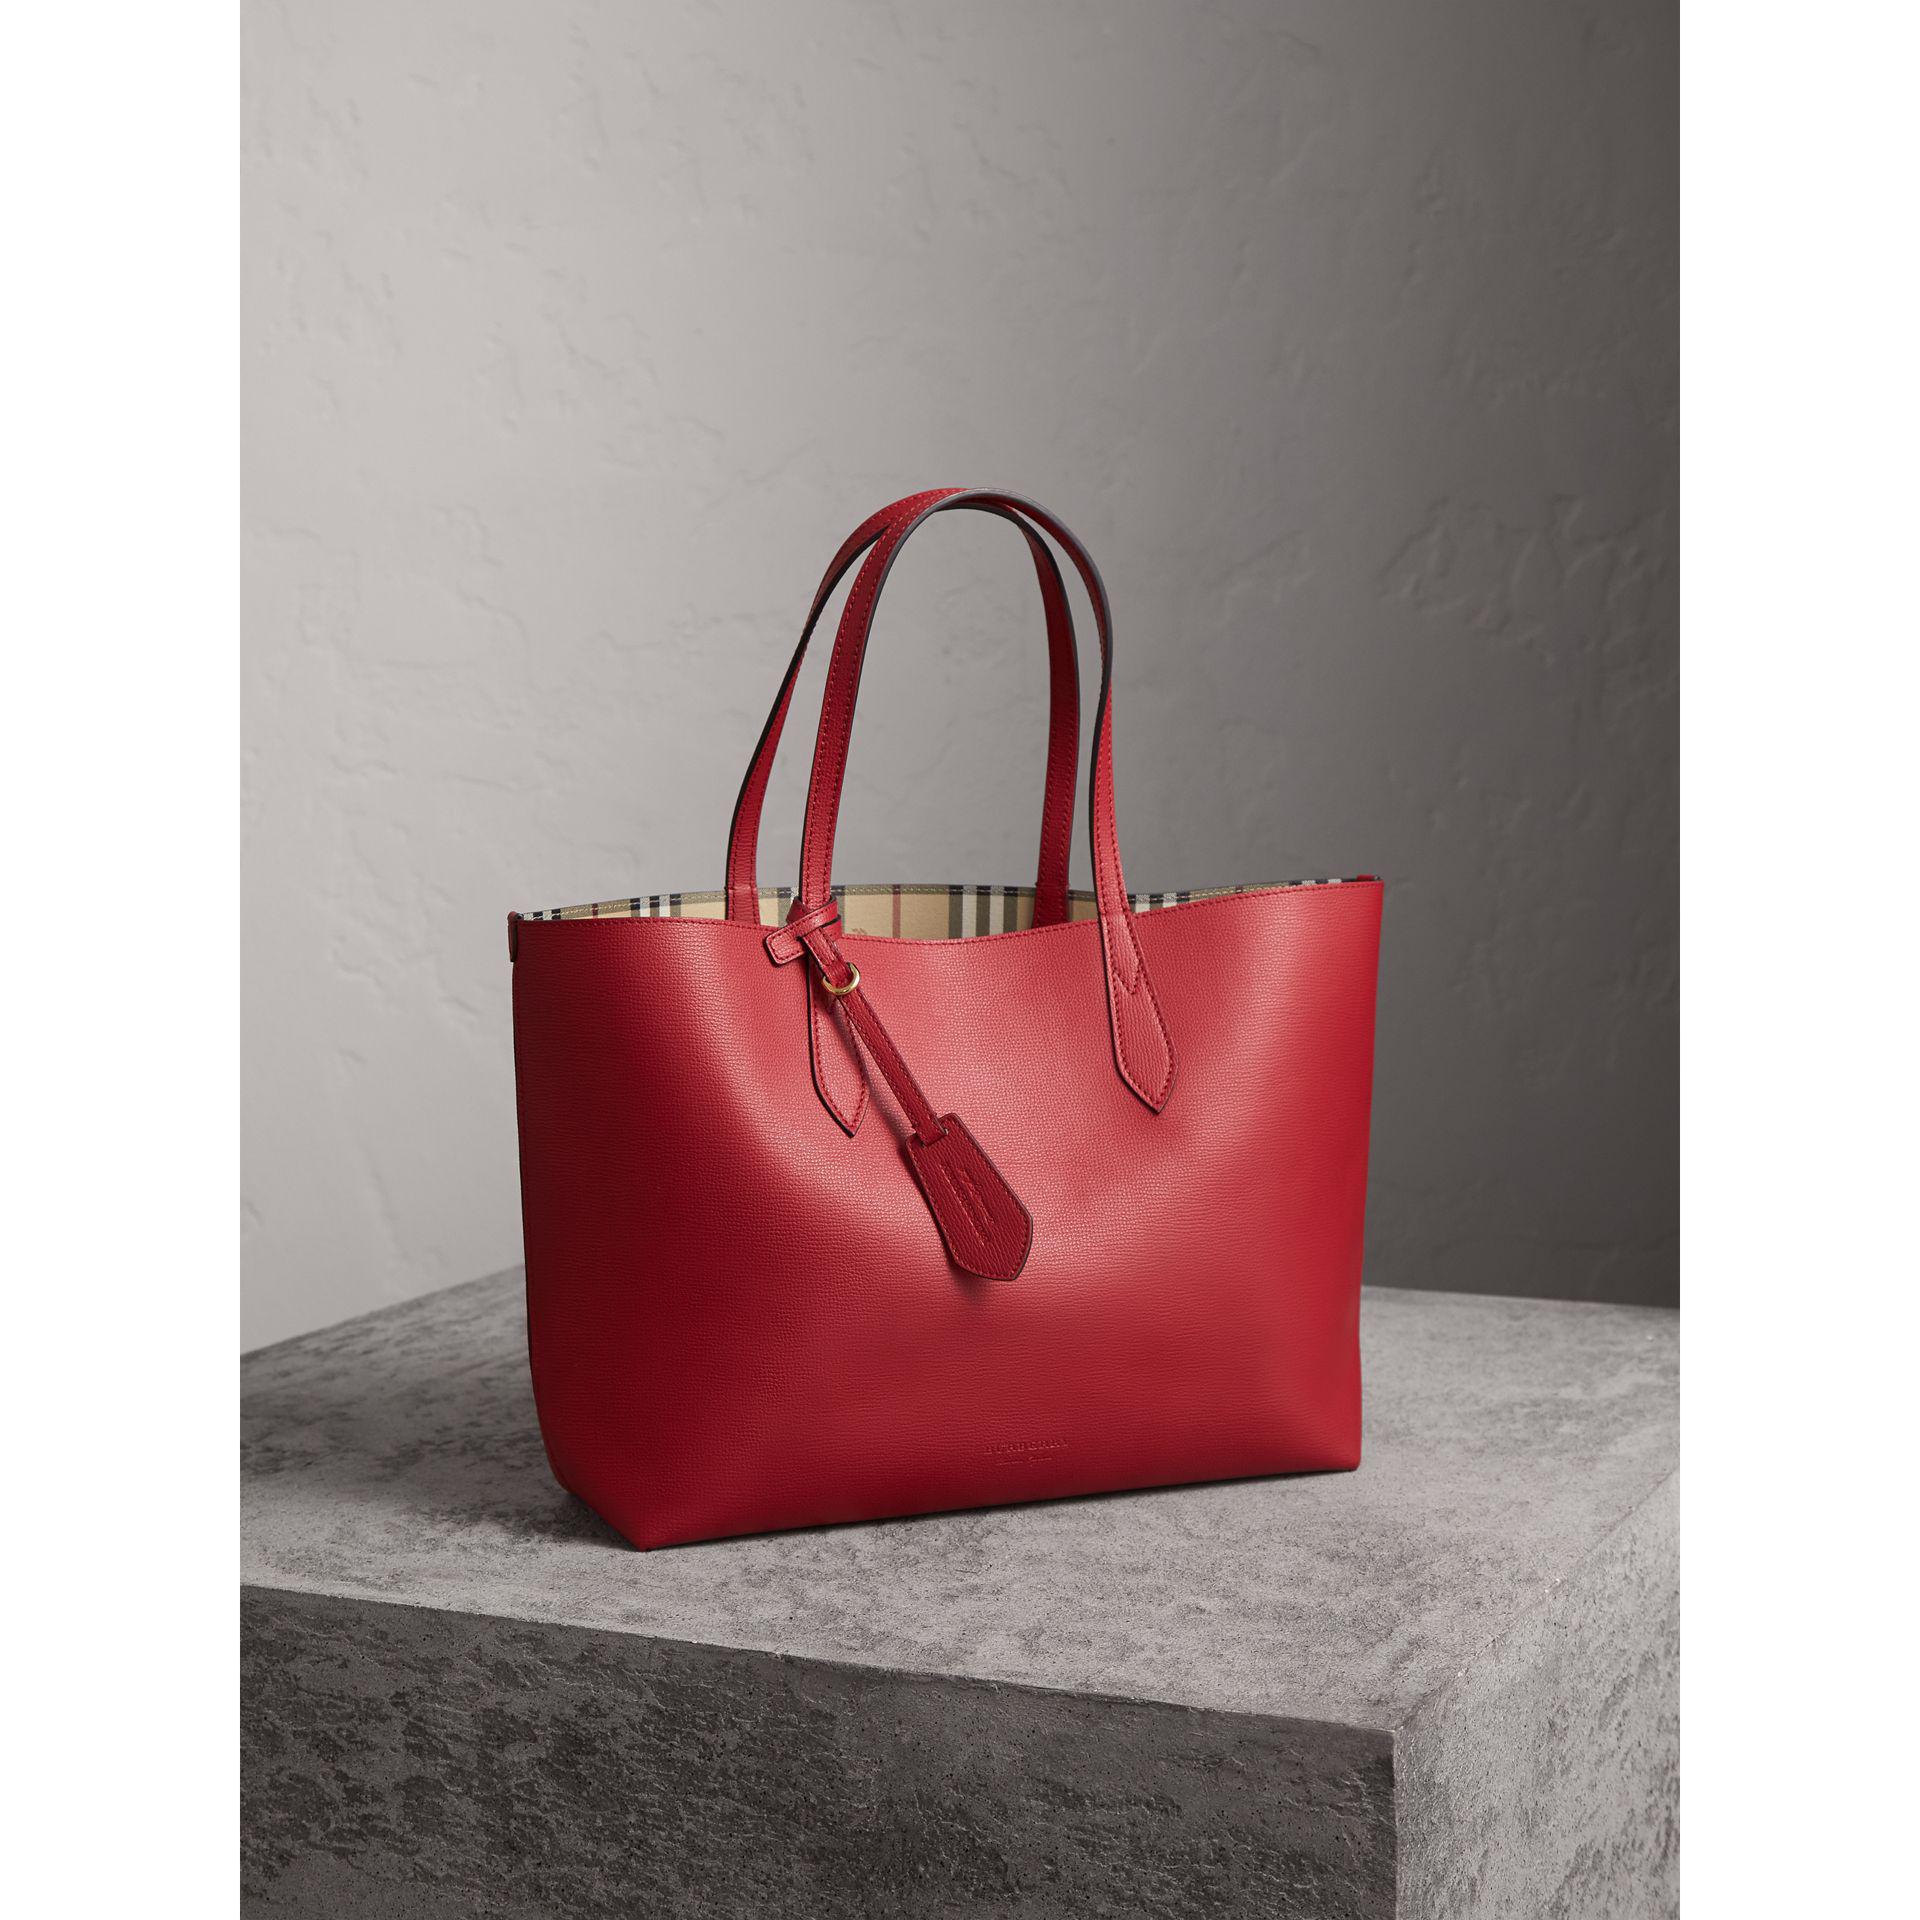 Burberry The Medium Reversible Tote In Haymarket Check And Leather Poppy Red  | Lyst